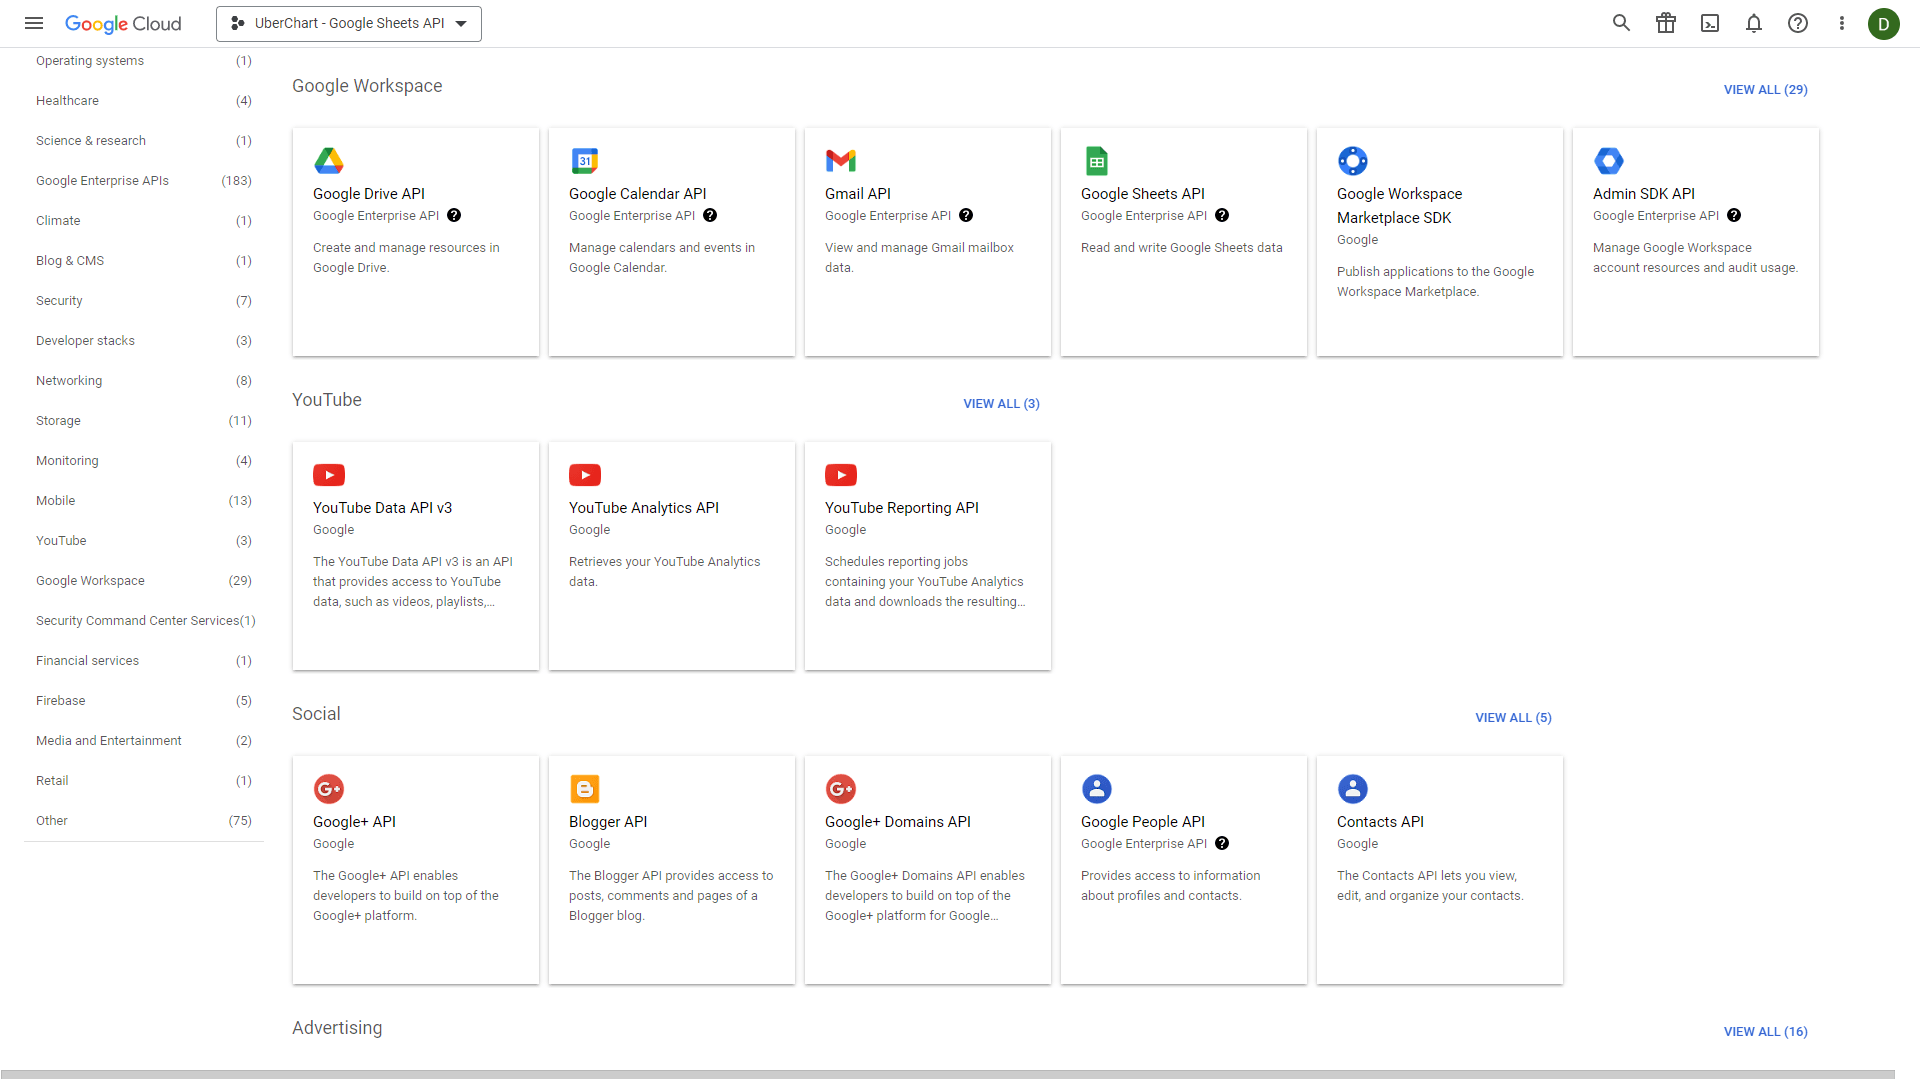 The services available in the Google Cloud site.